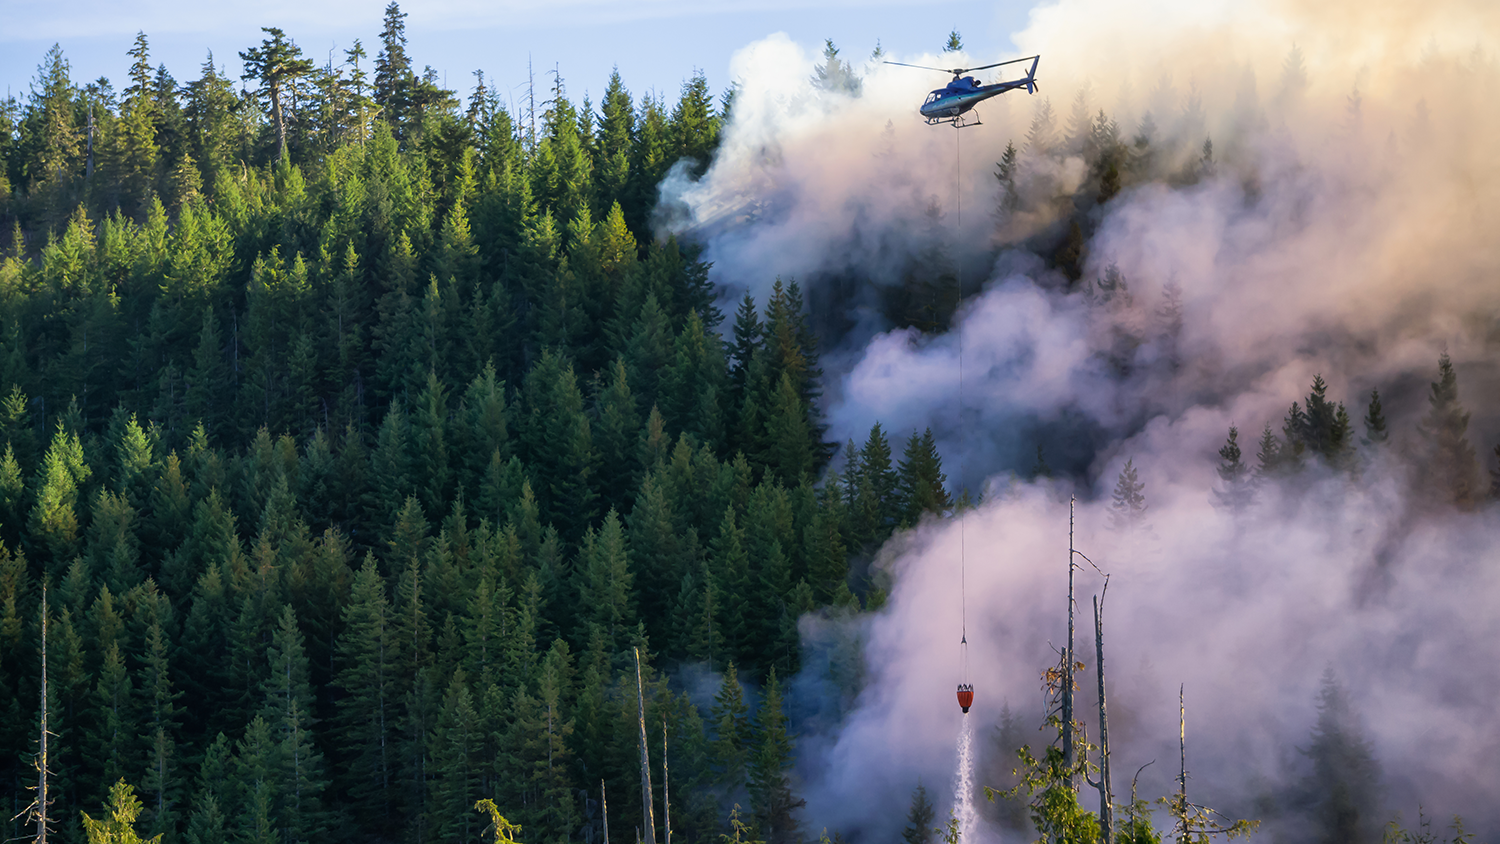 A helicopter releases water to extinguish a wildfire in British Columbia, Canada - Why Canada's Wildfires Are So Bad This Year - College of Natural Resources News - NC State University